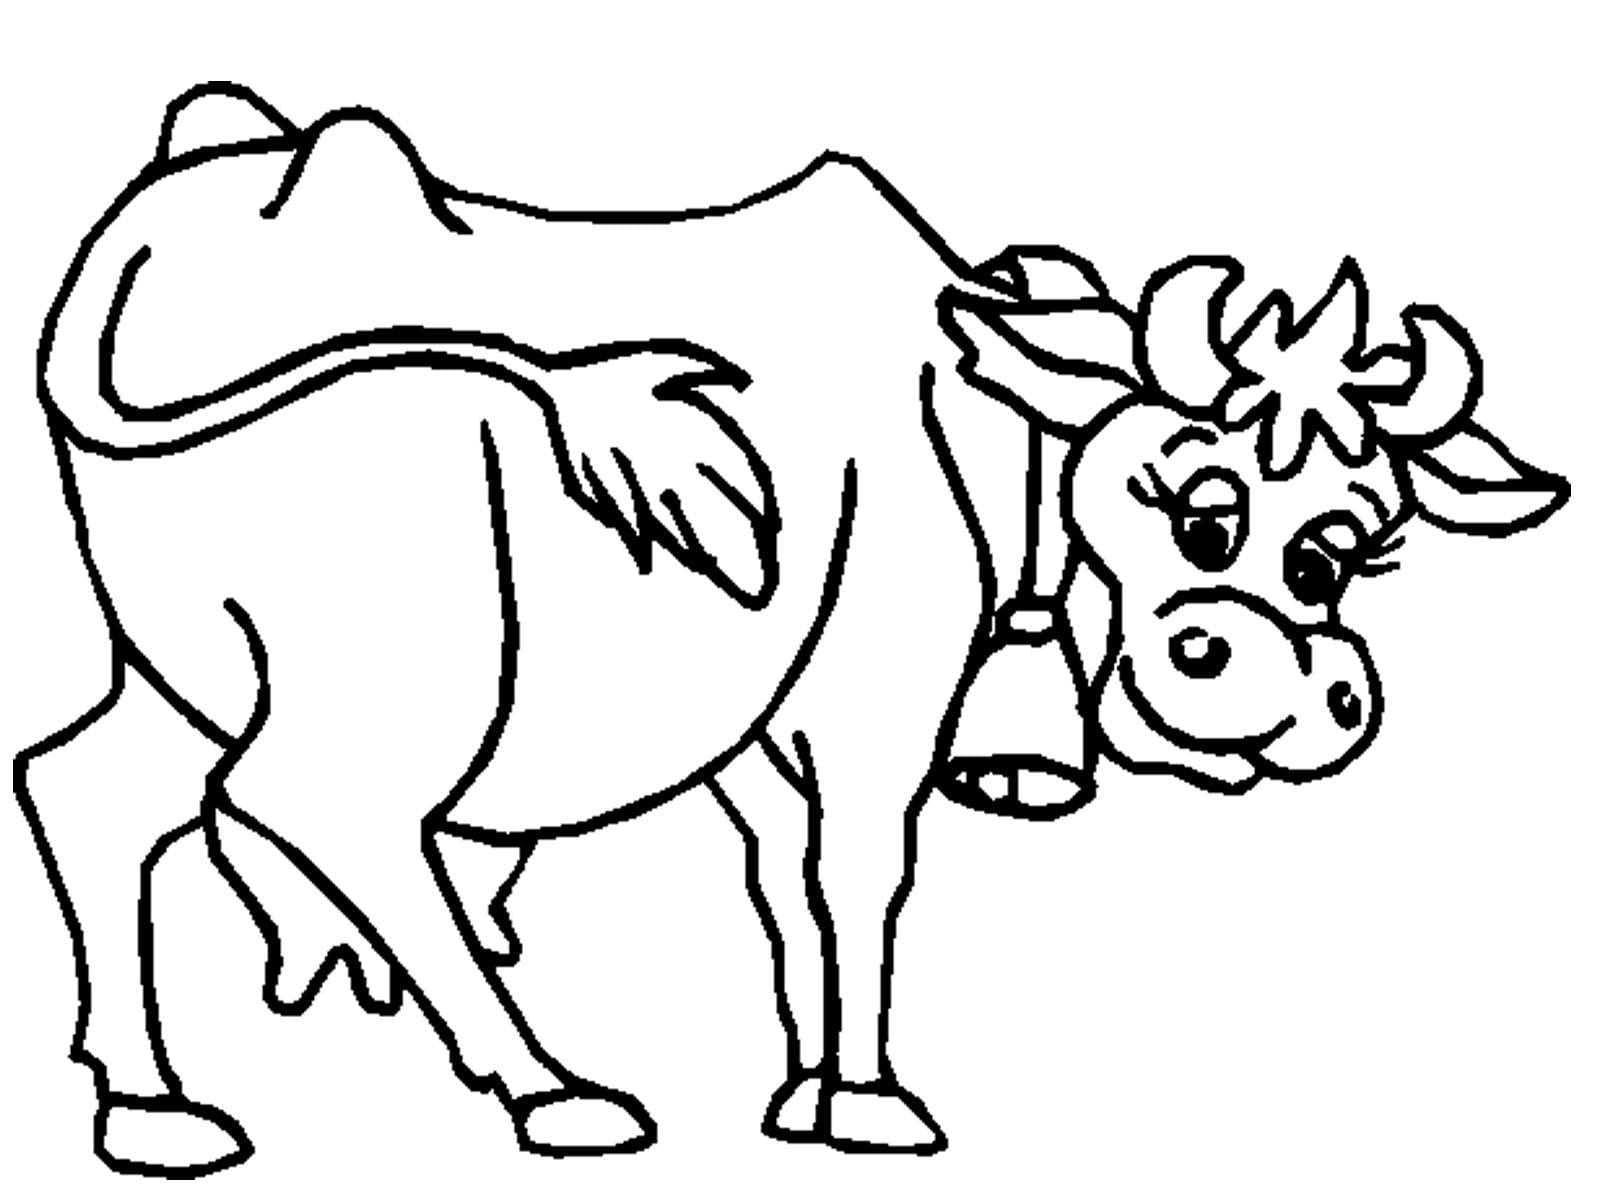 Zani cow coloring book for children 4-5 years old